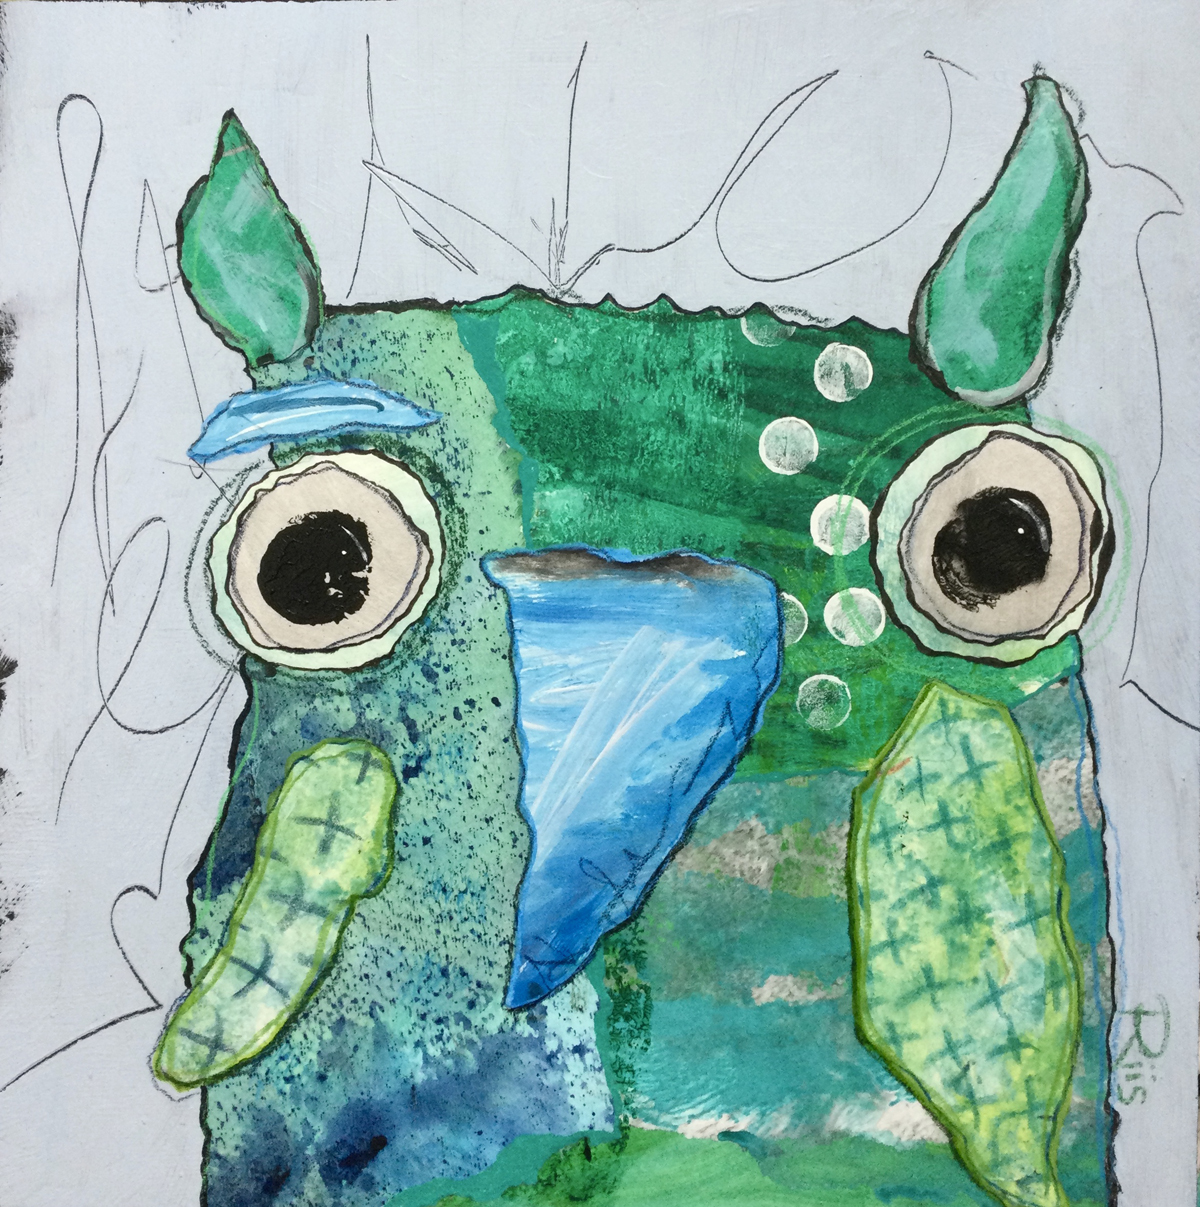 Mixed media collage of an abstract owl in shades of green on a pale blue background.